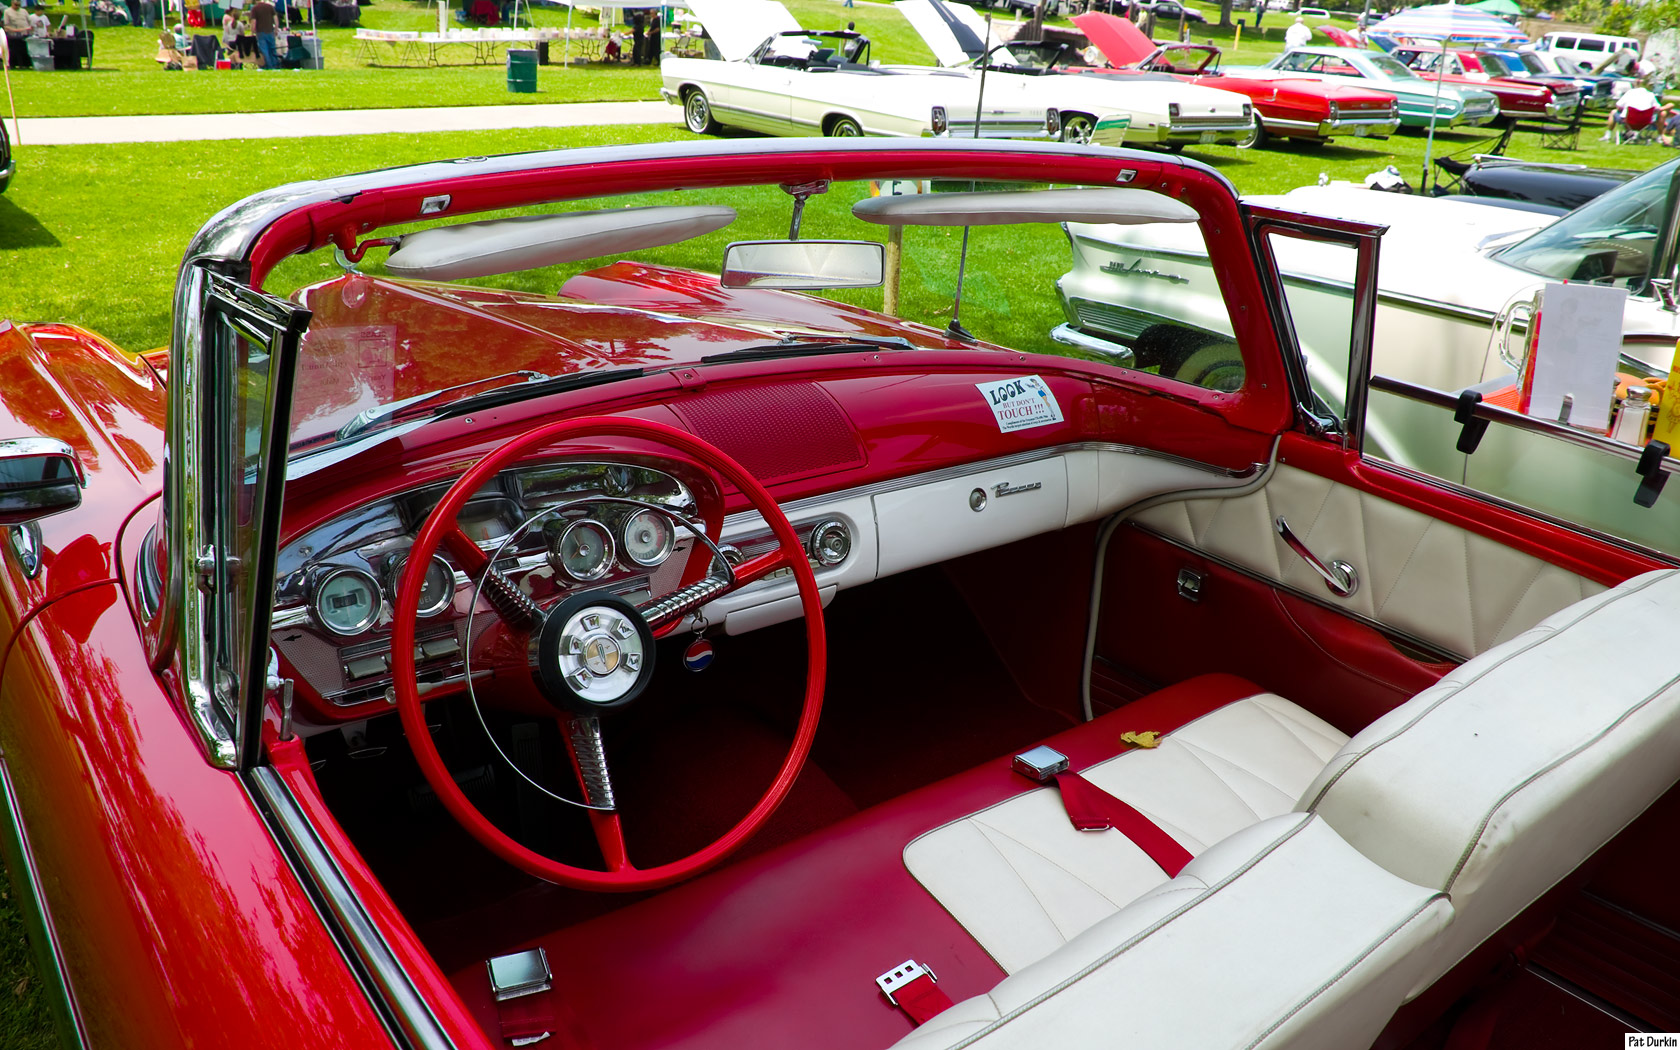 1958 Edsel Pacer Convertible with top down - red & white ...